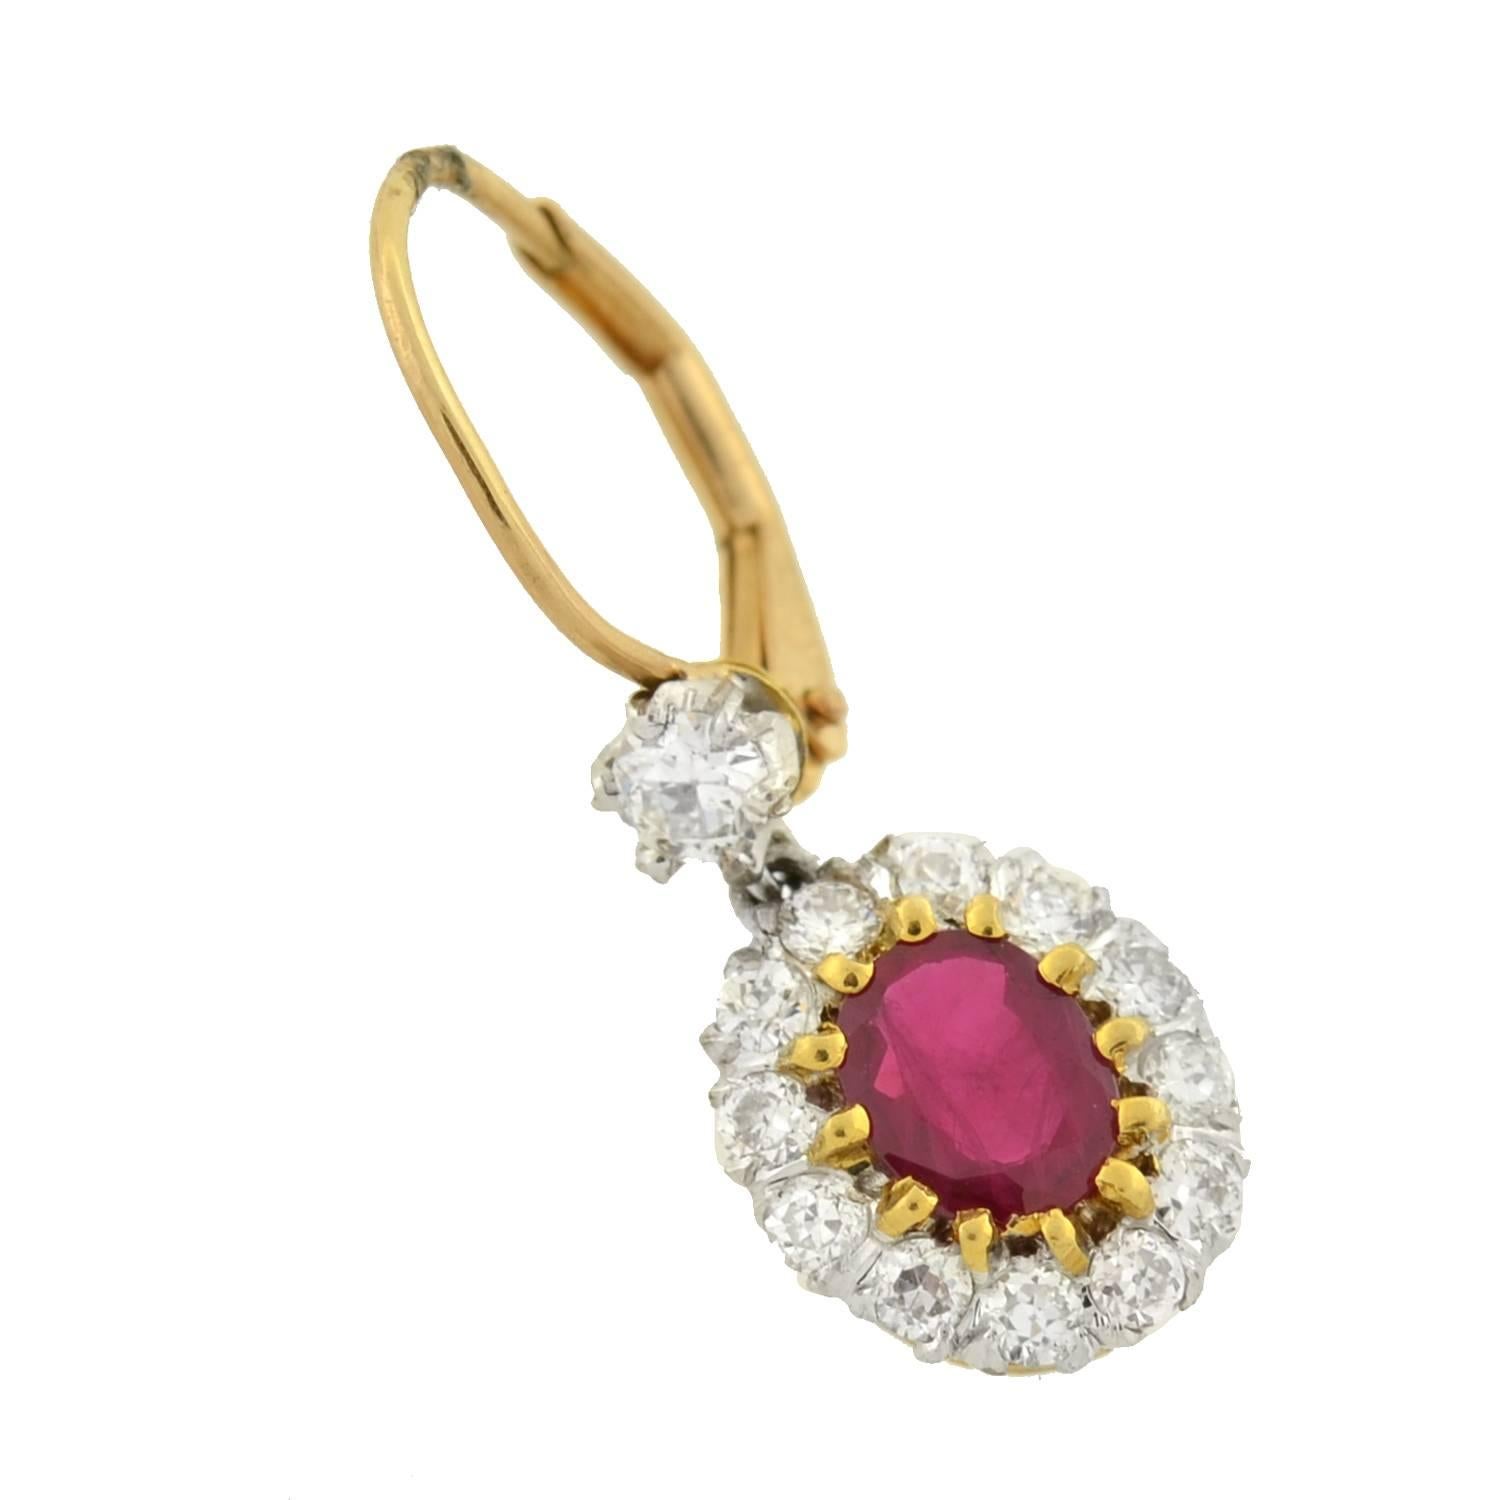 Absolutely exquisite contemporary ruby and diamond earrings! These gorgeous earrings are made of platinum topped 14kt yellow gold and each adorns a single, oval shaped ruby stone that rests in the center. The luscious, vibrant stones have a faceted